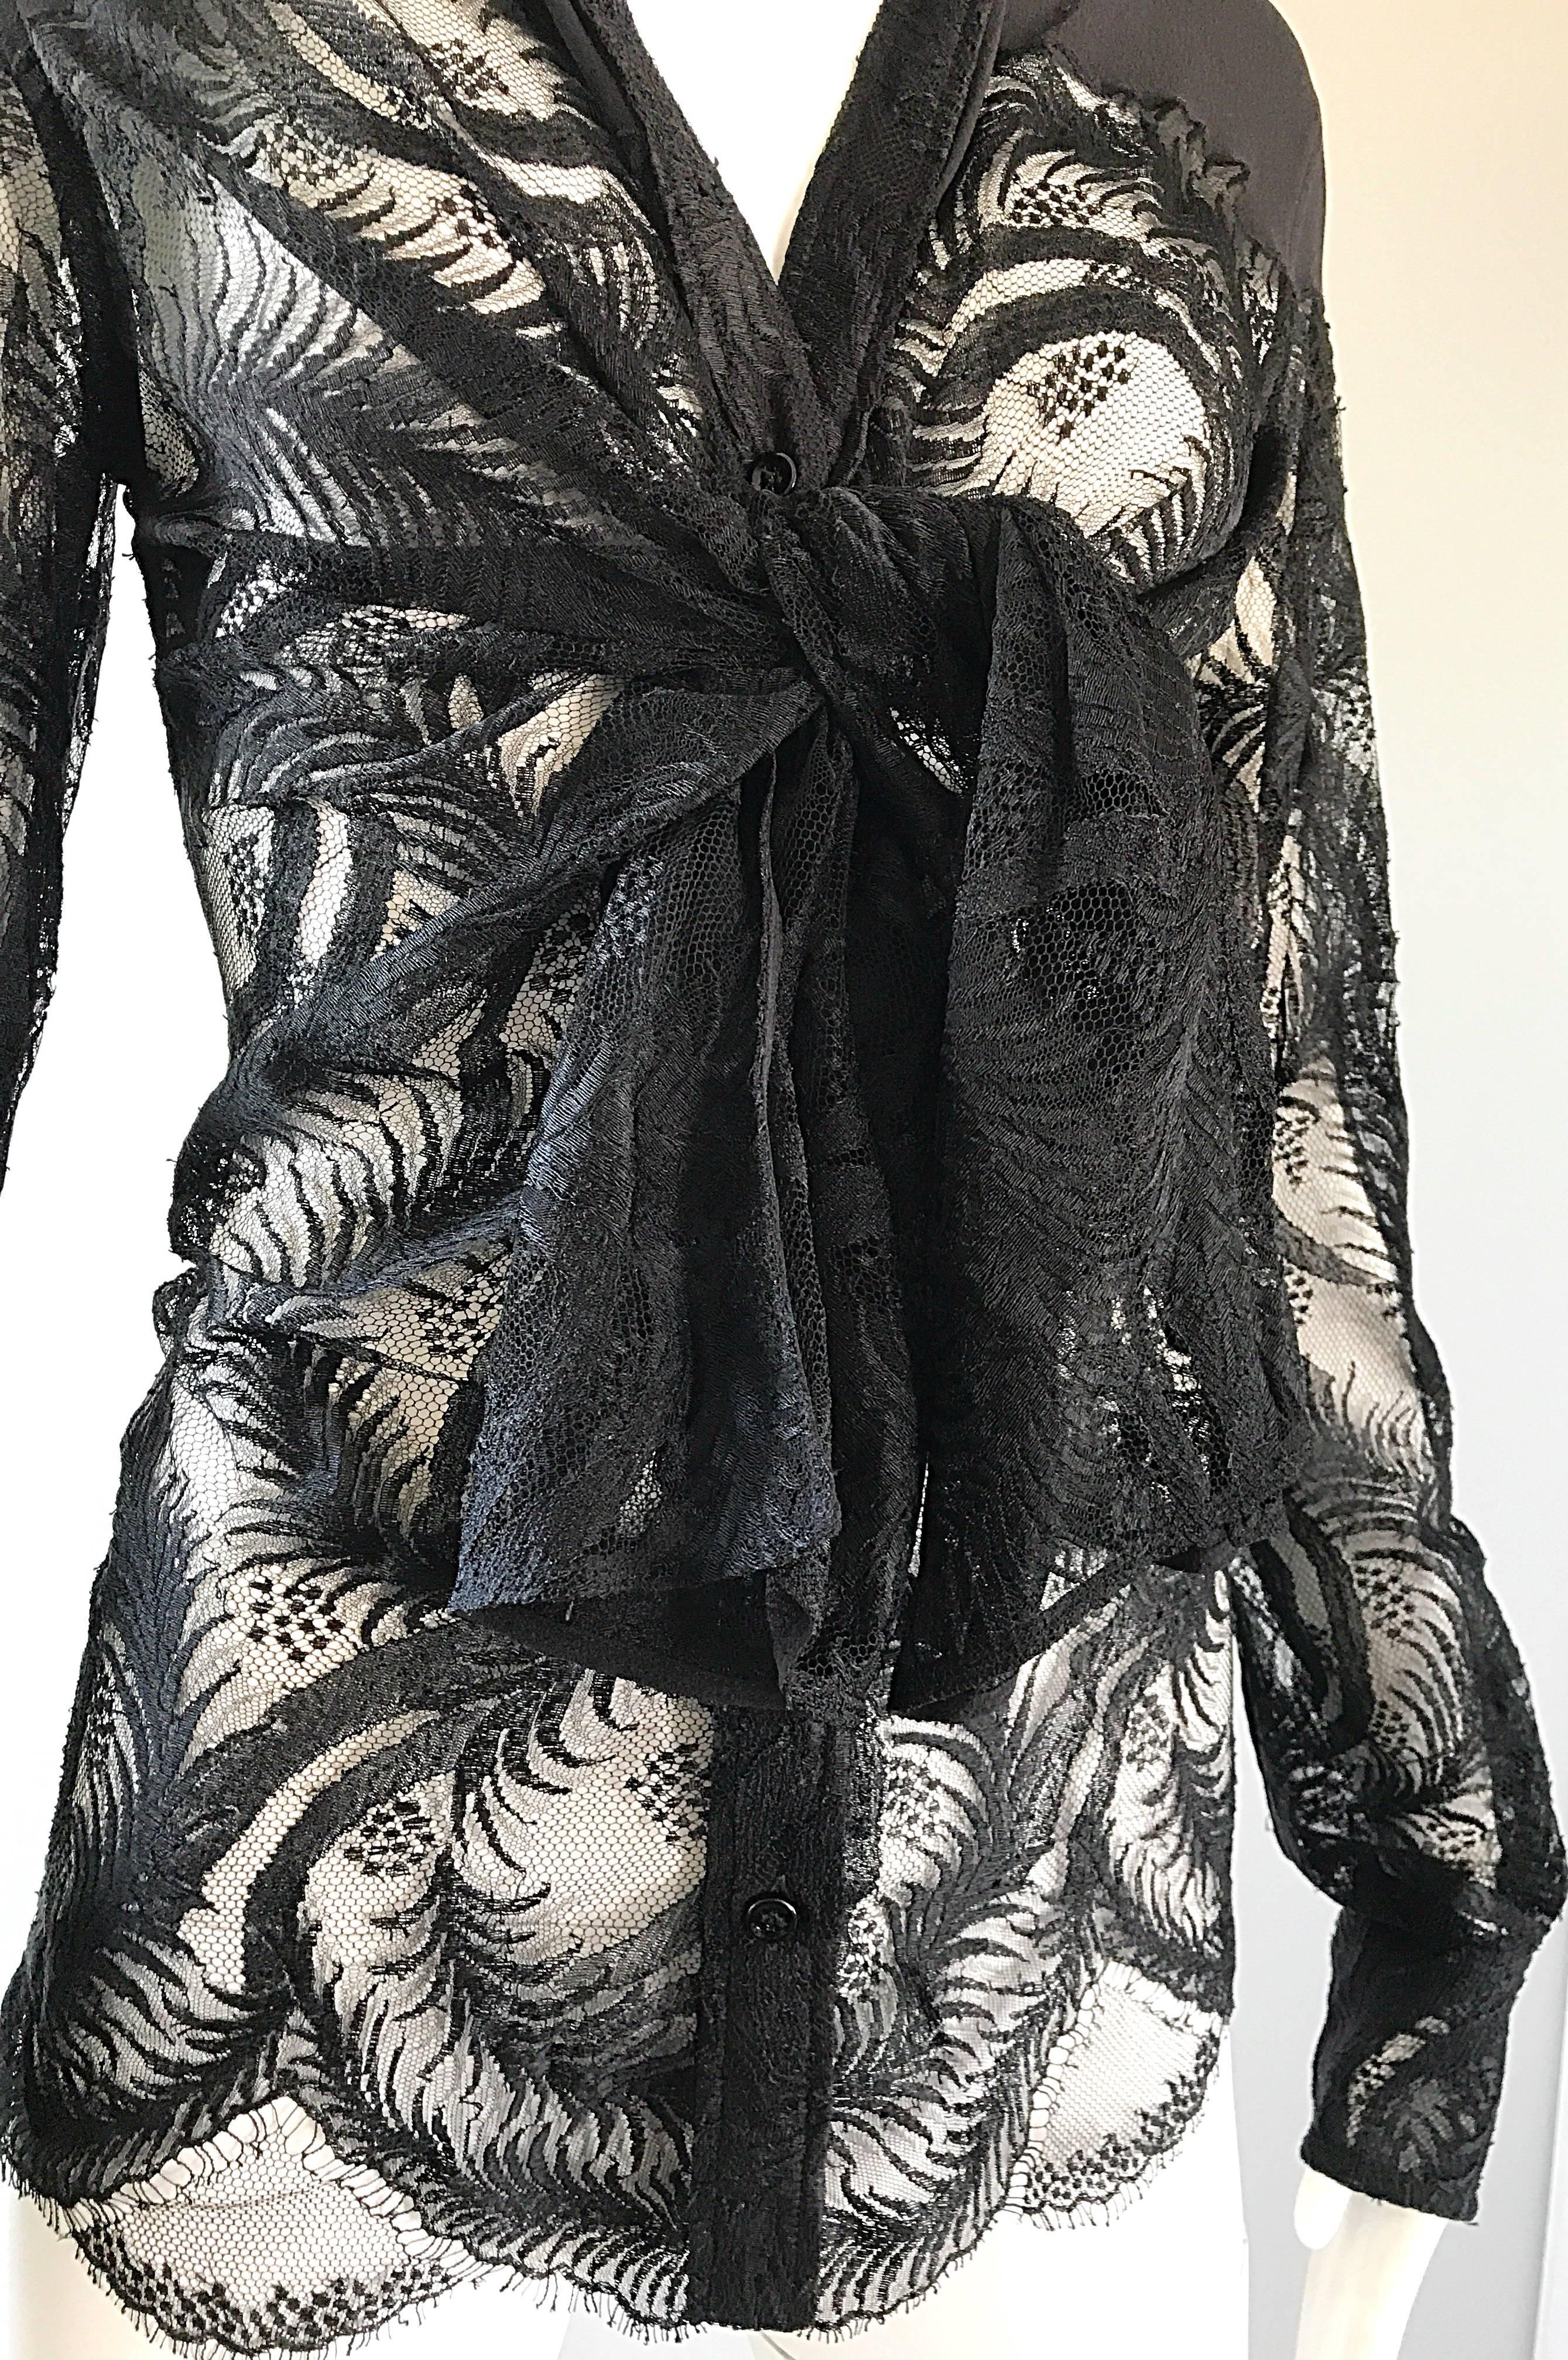 Tom Ford for Yves Saint Laurent Black Chantilly French Lace Semi Sheer Blouse 2